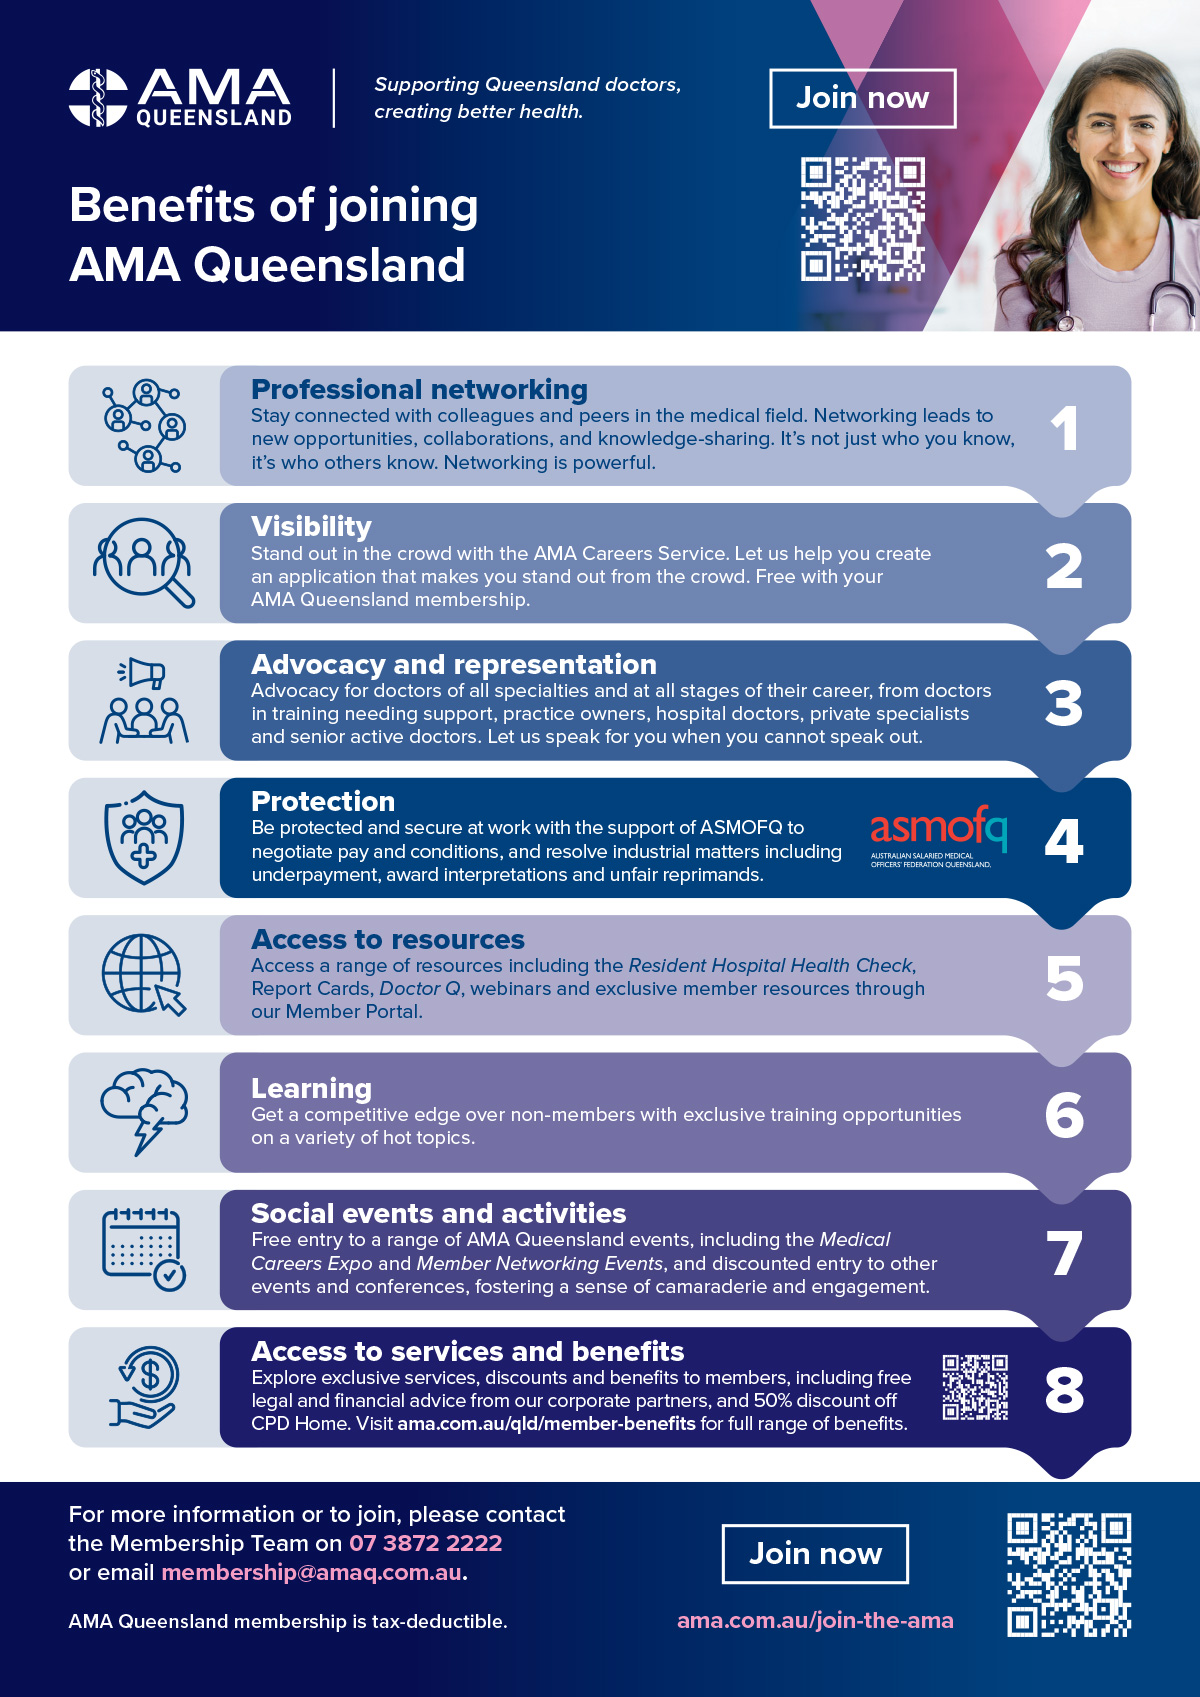 Why join AMA Queensland